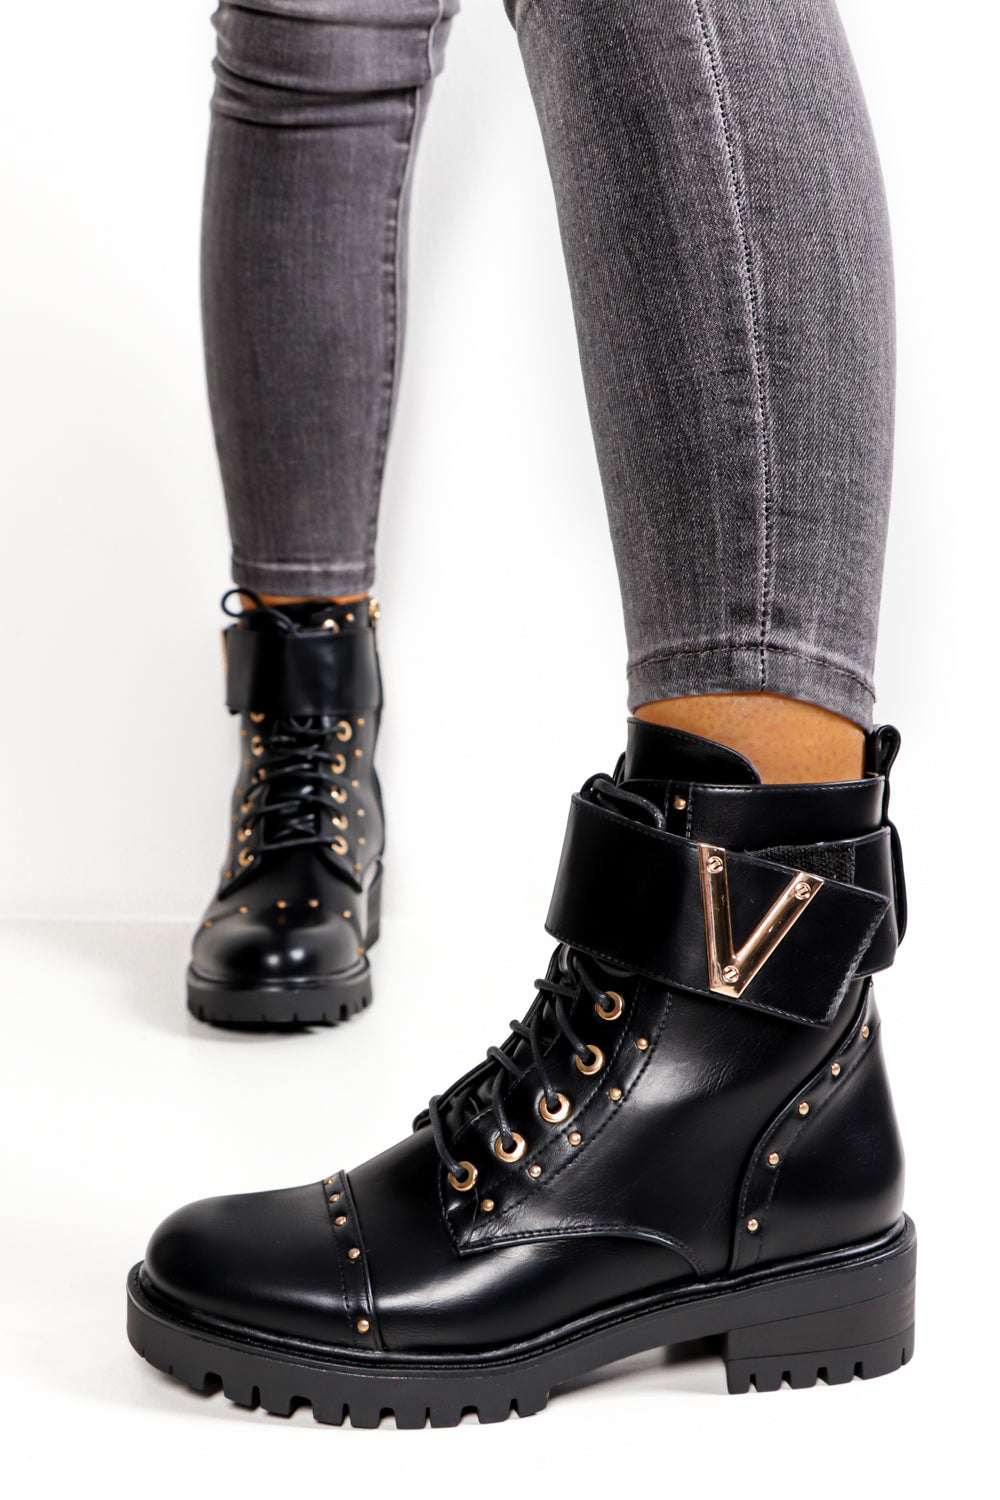 black and gold boot